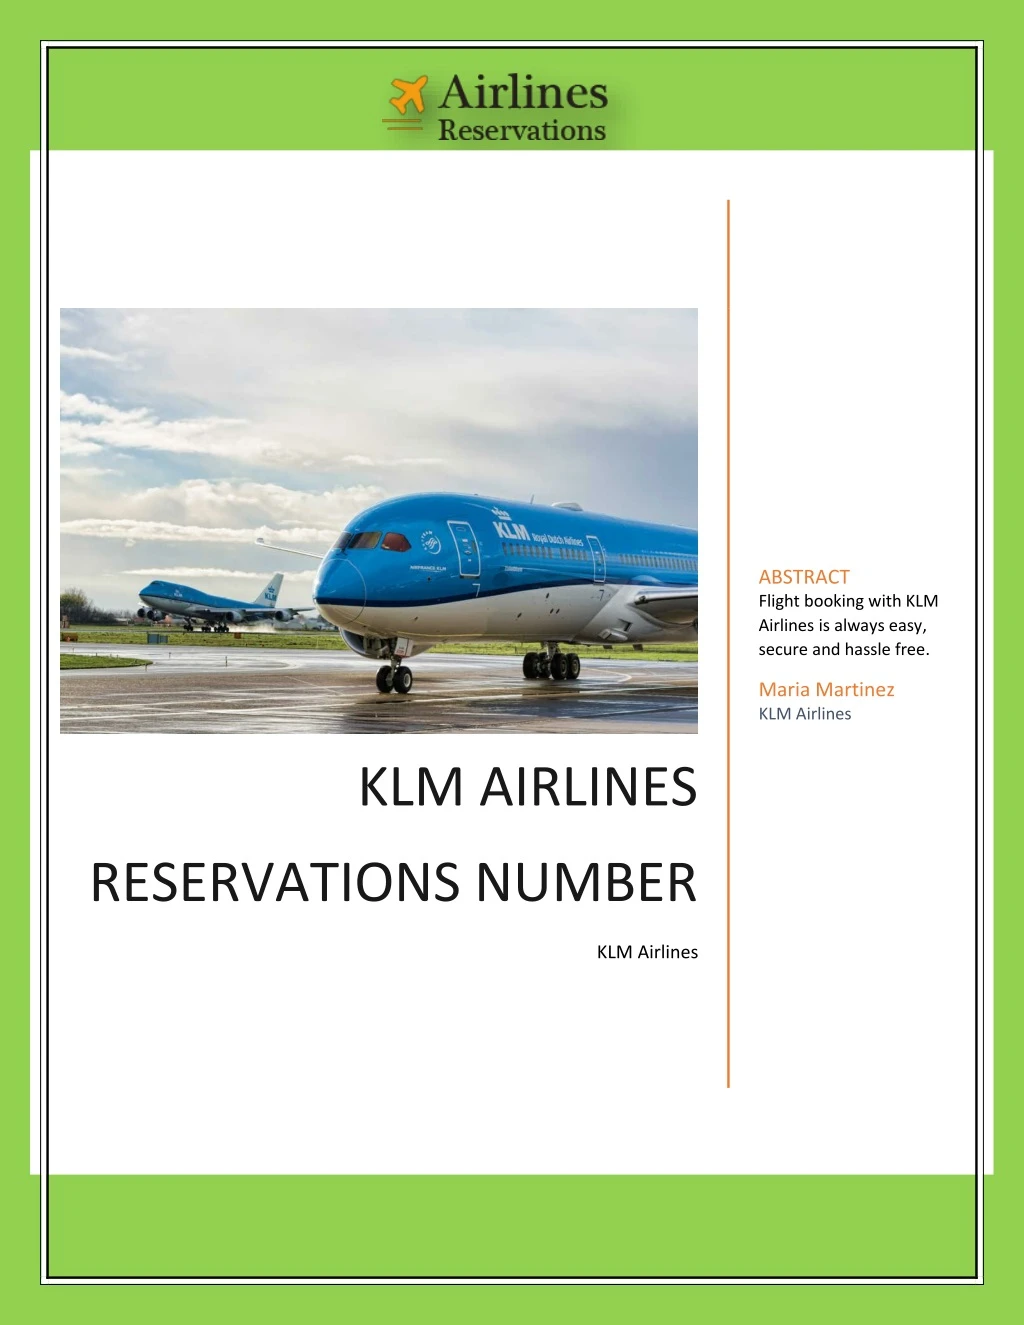 abstract flight booking with klm airlines